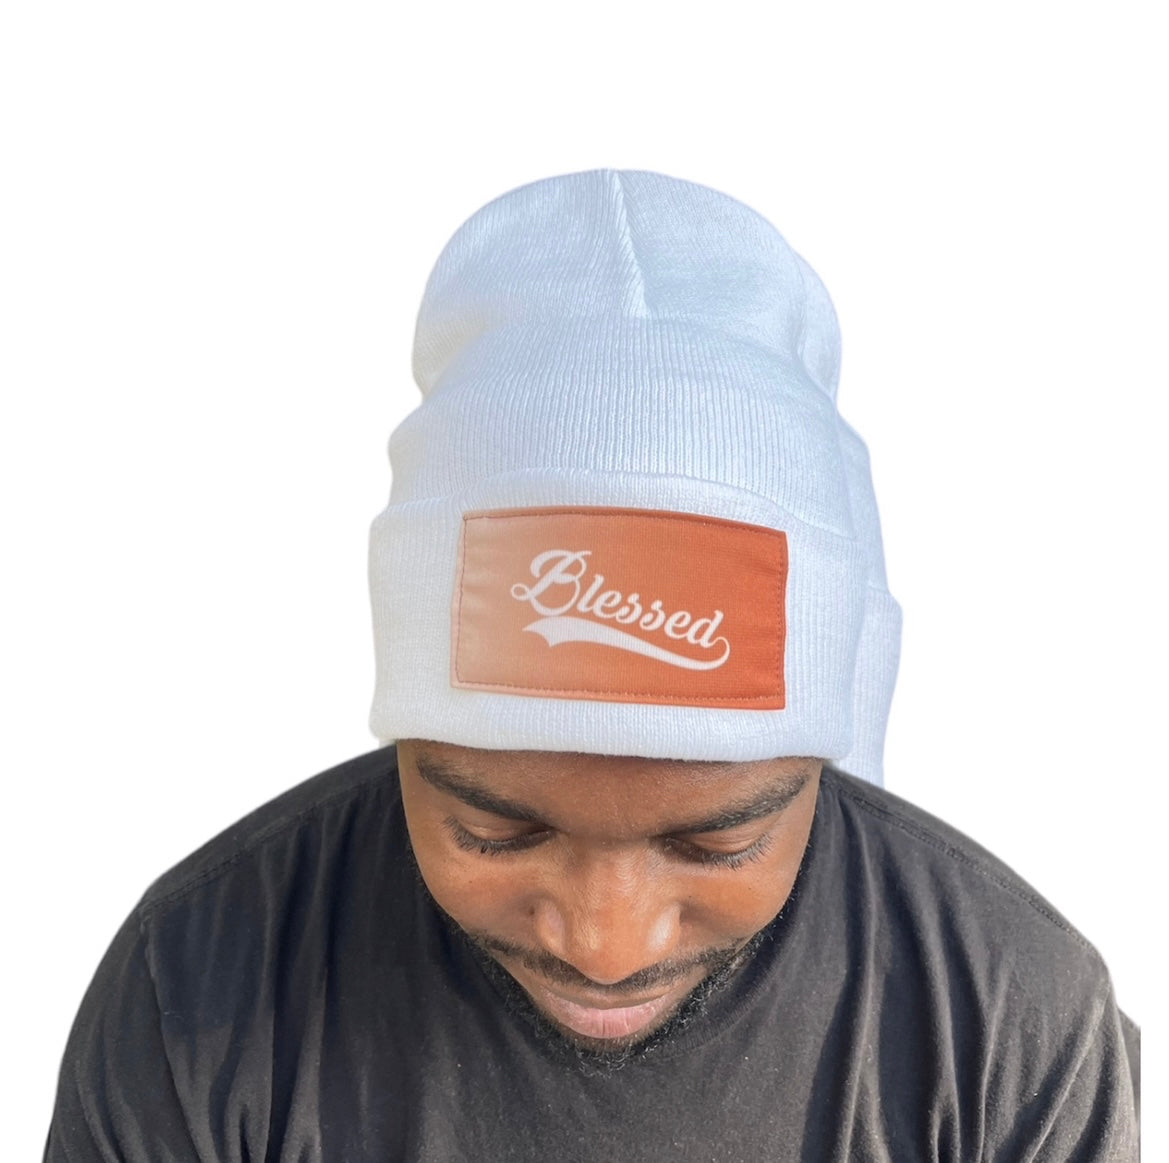 Blessed in White Ombre Solid Knit Beanie